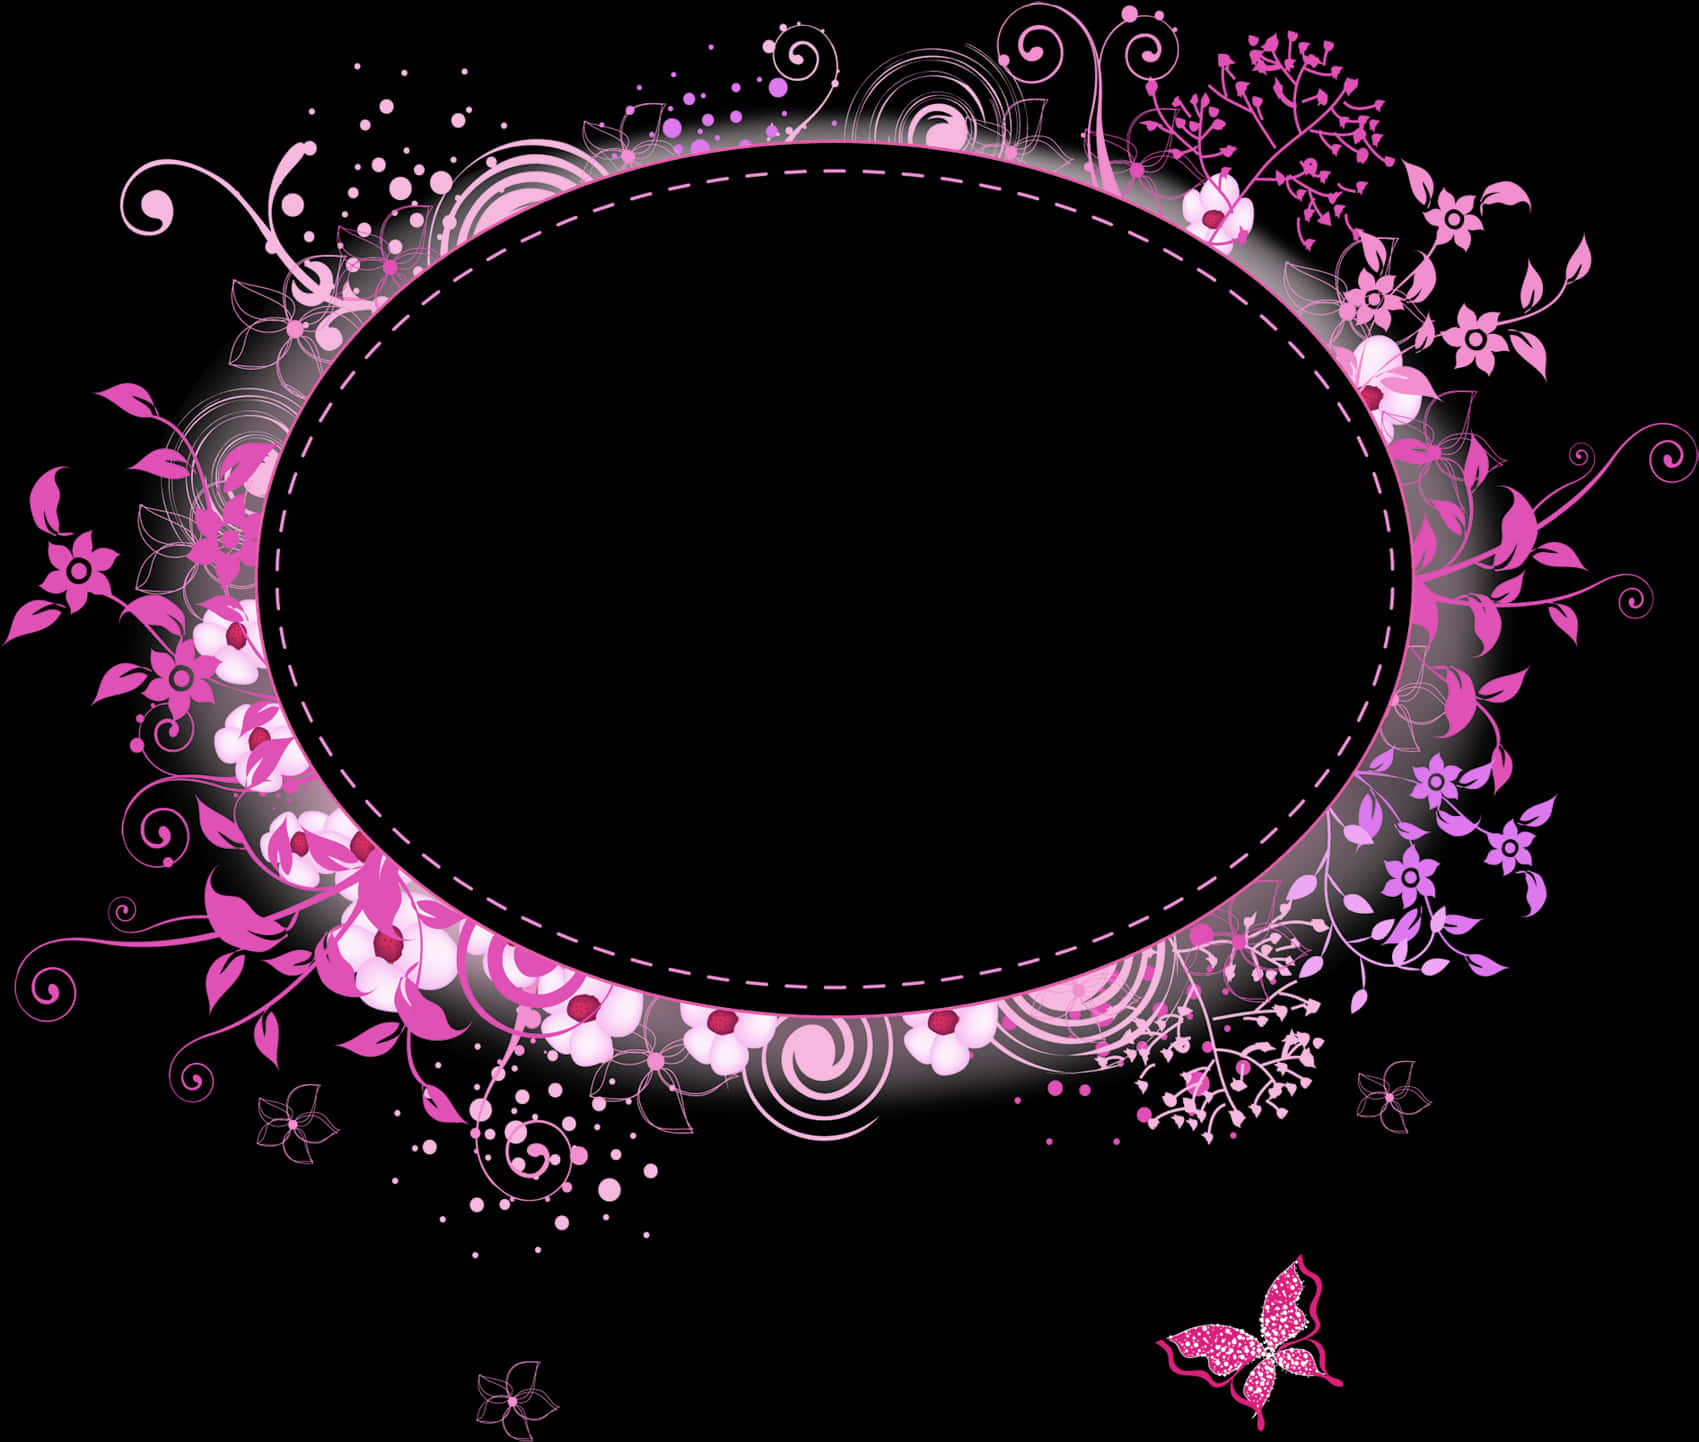 A Black Background With Pink And White Flowers